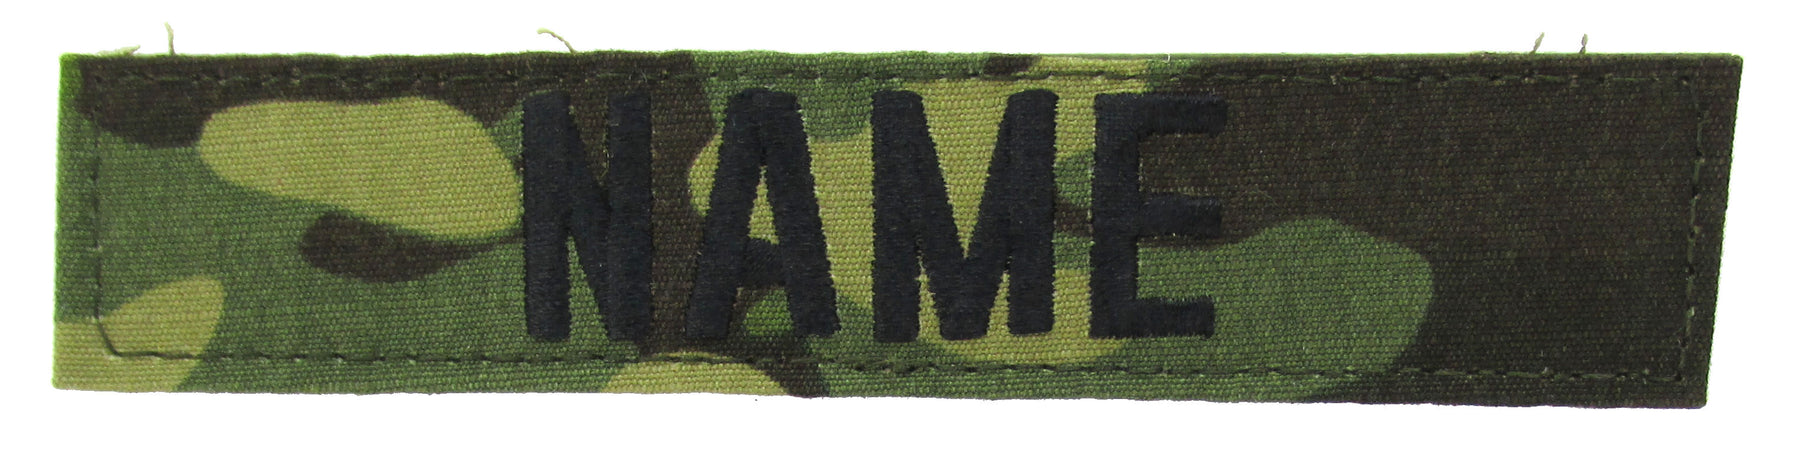 Multicam Tropic Name Tape with Hook Fastener - Fabric Material